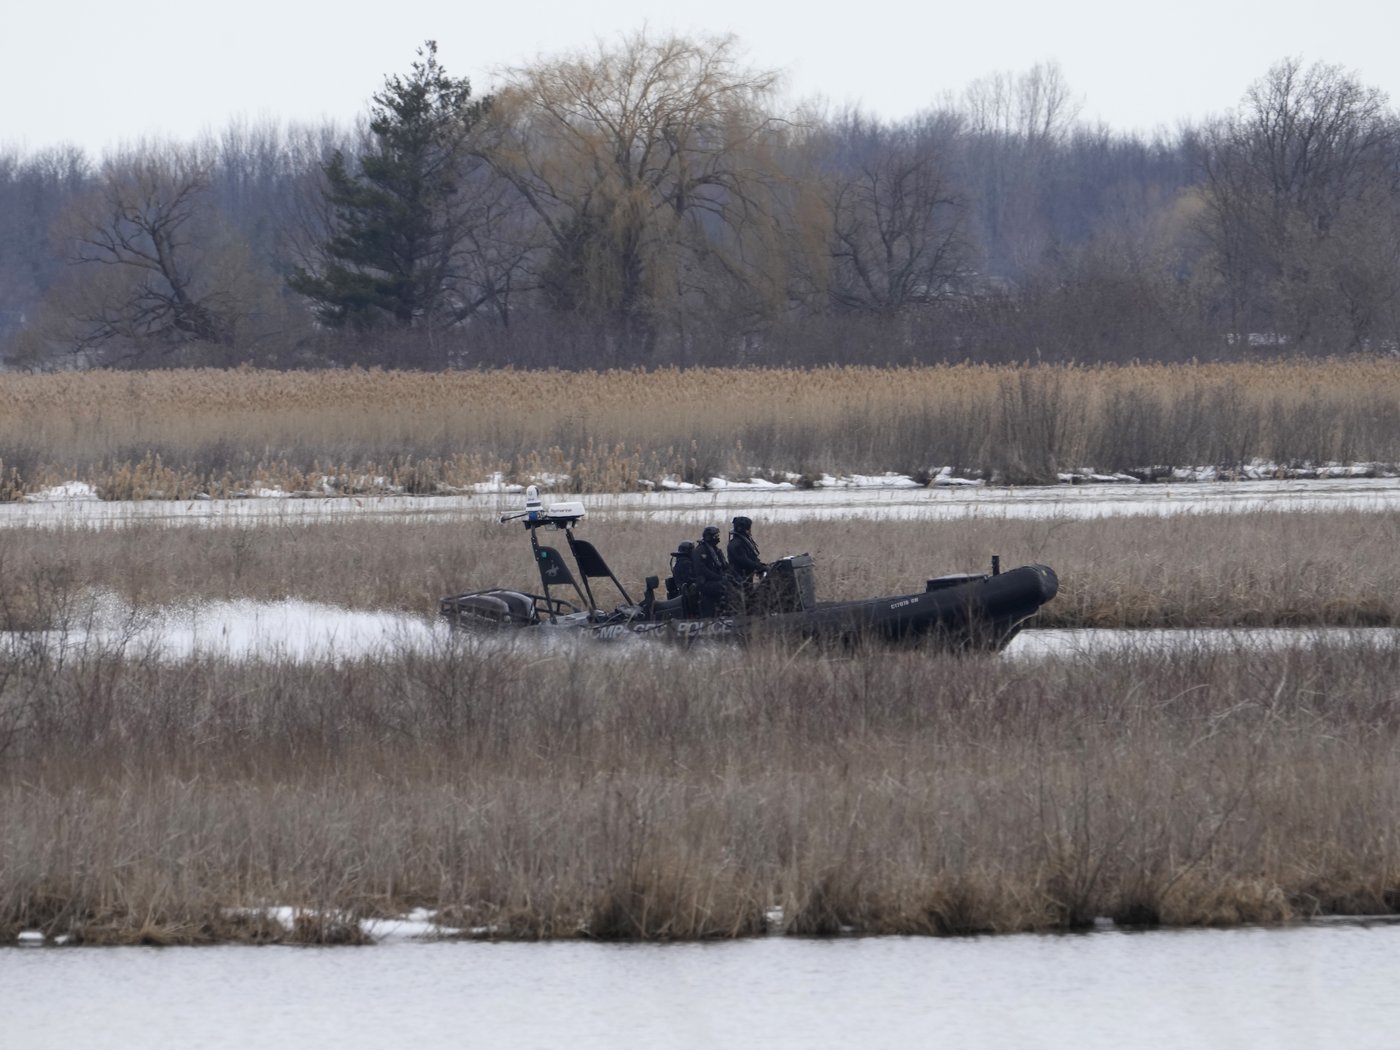 Police boat searching the area in Akwesasne, Quebec, March 31, 2023